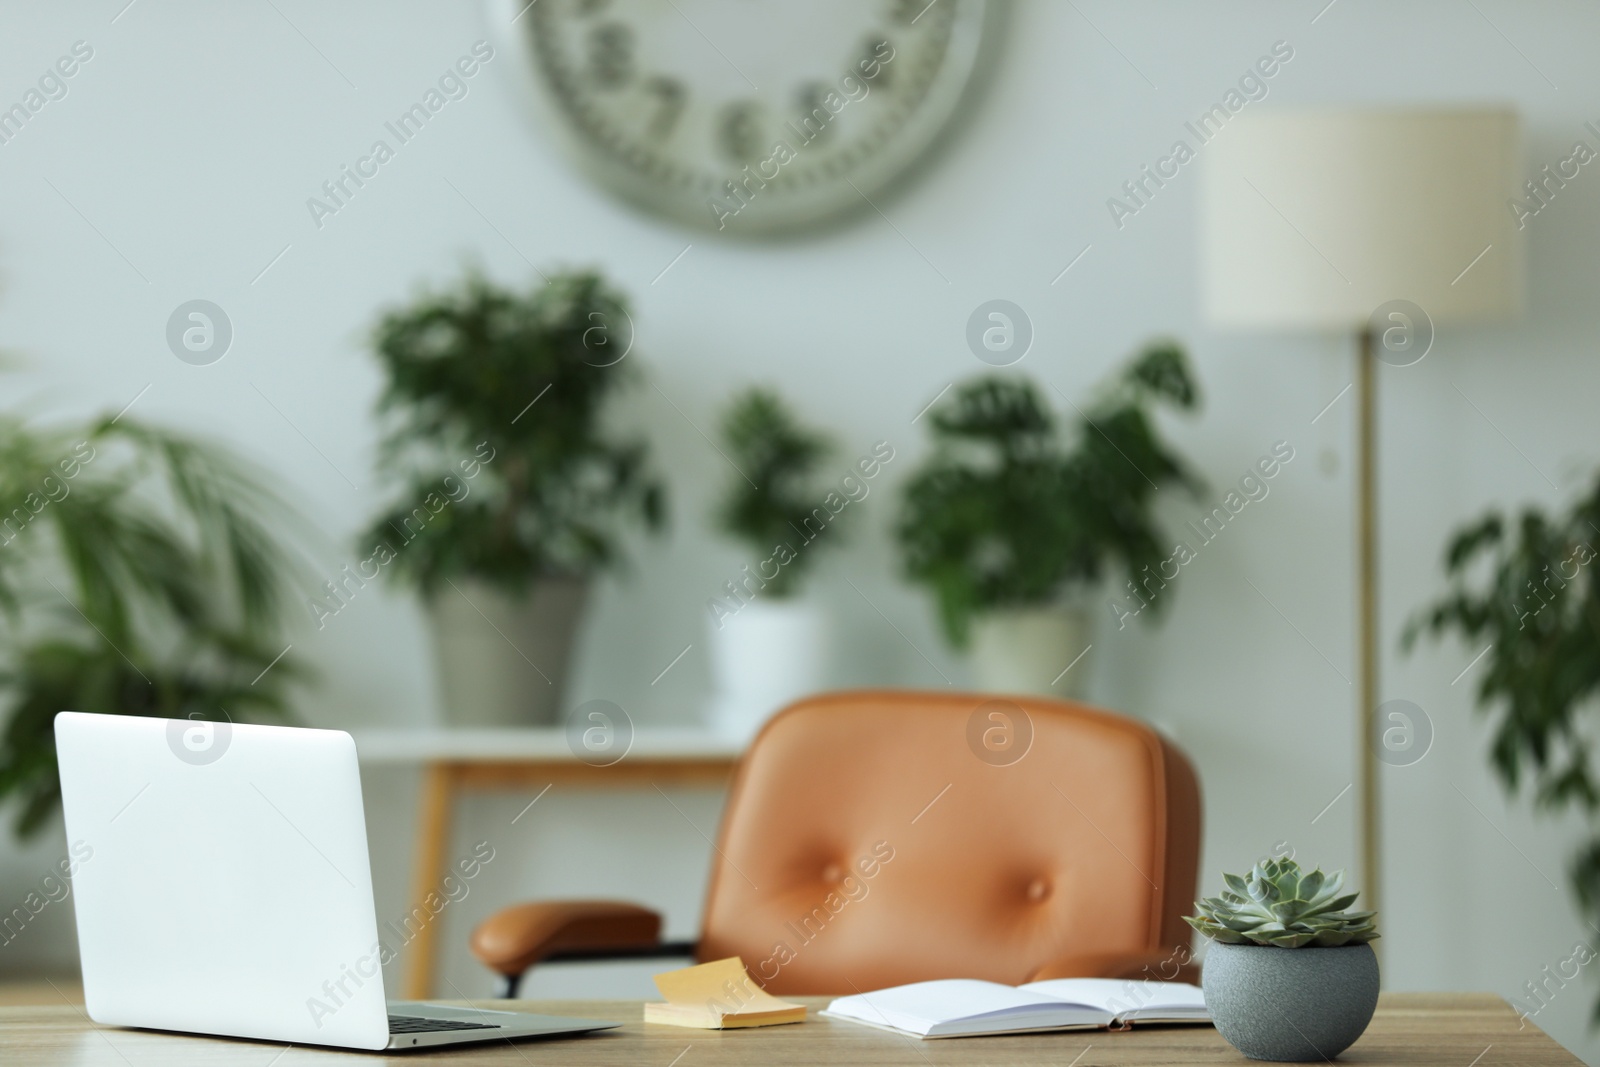 Photo of Comfortable workplace with modern laptop on wooden table in room. Interior design